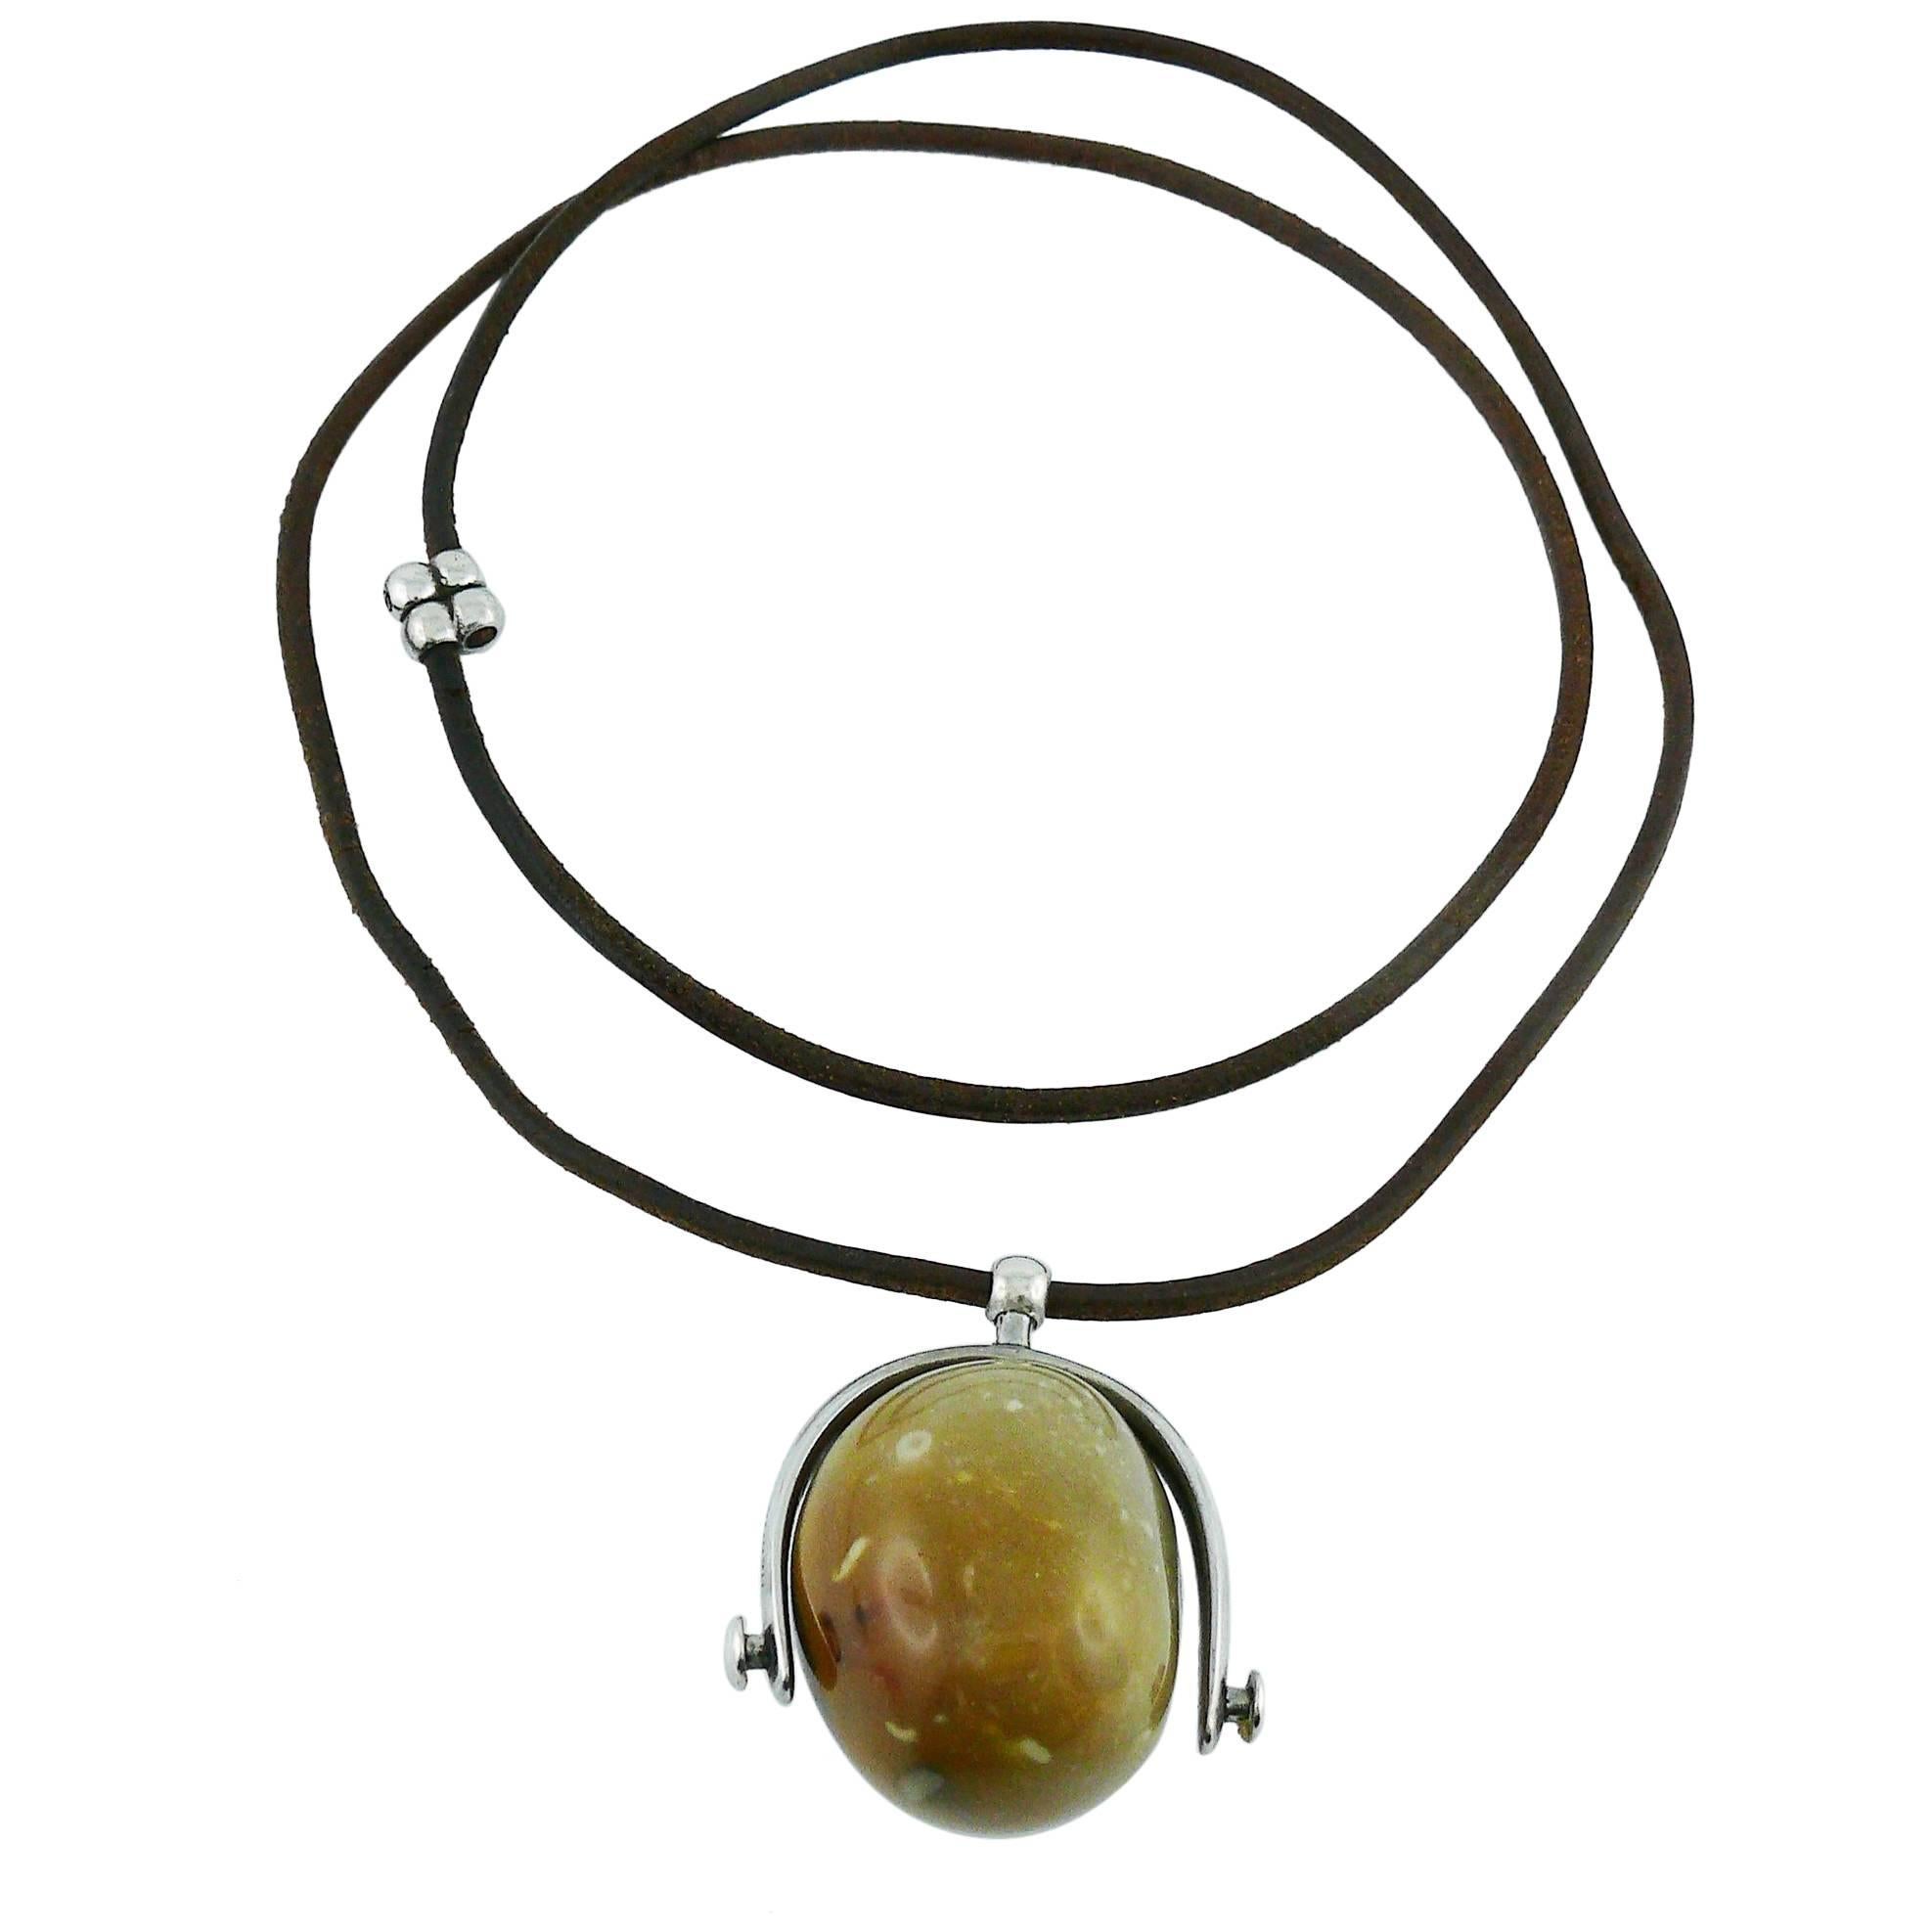 Hermes Vintage Hard Stone Pebble and Solid Silver Stirrup Pendant Necklace